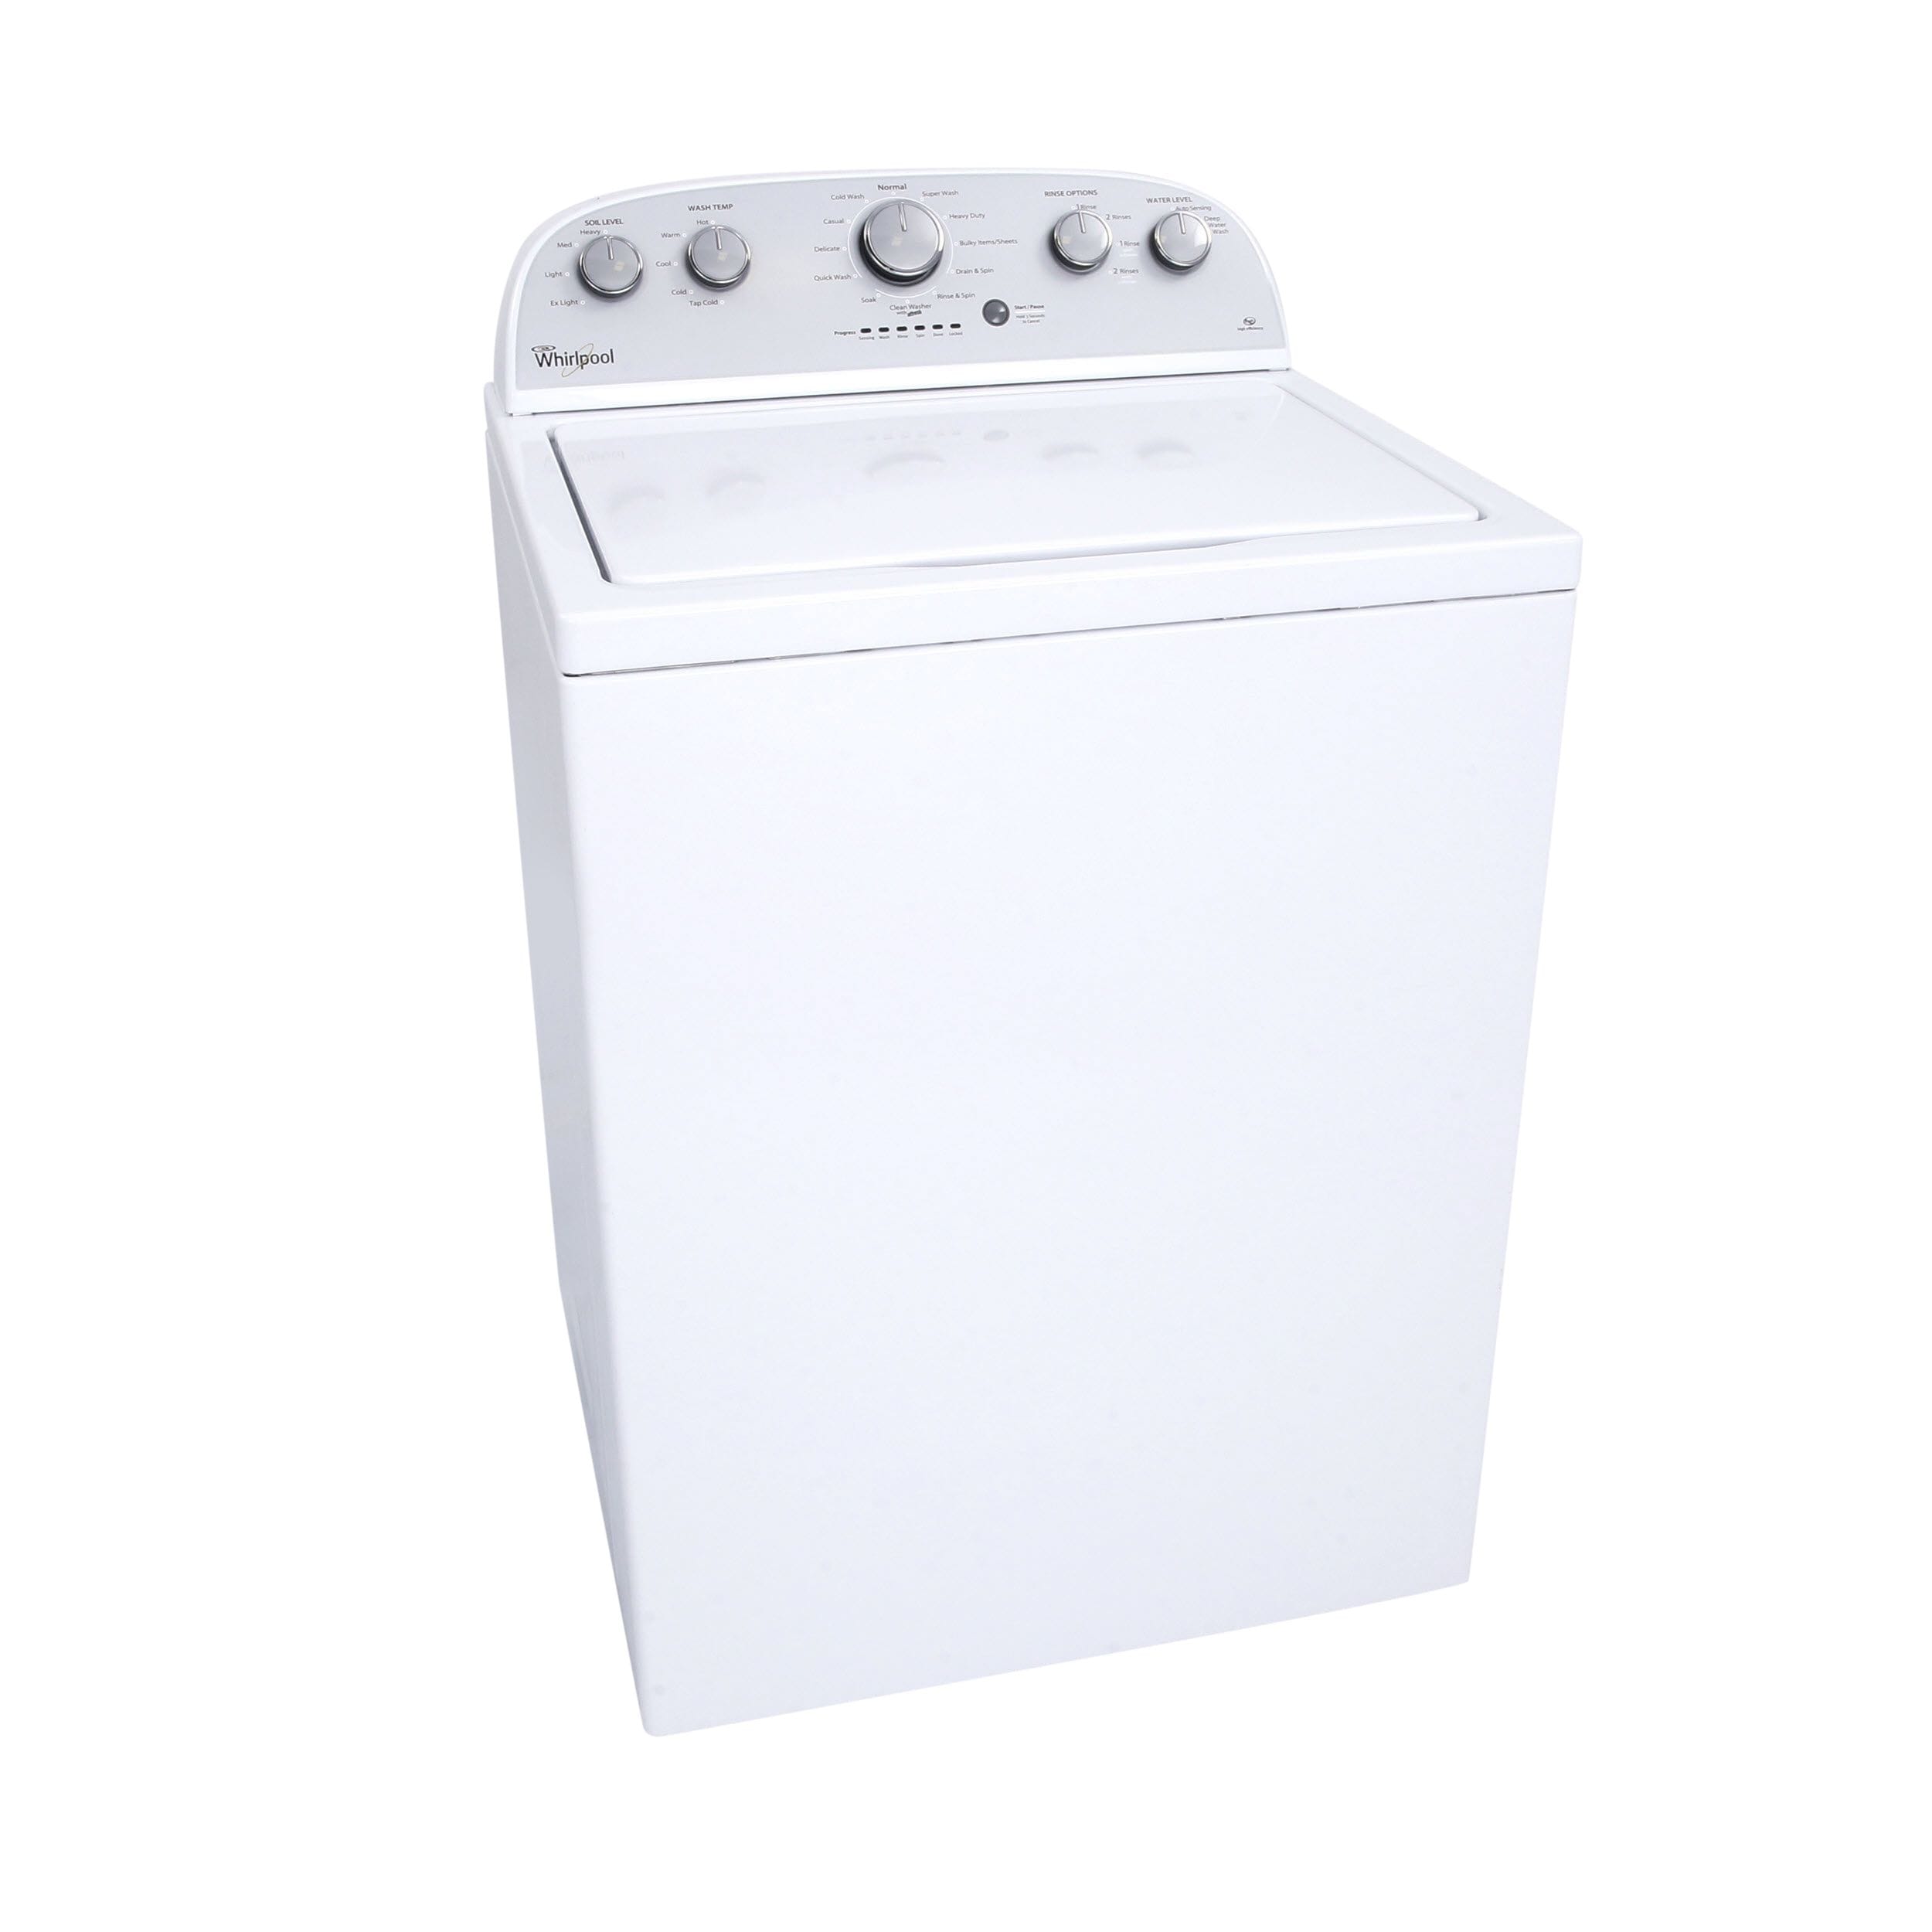 matron Åre opstrøms Whirlpool 3.5-cu ft High Efficiency Agitator Top-Load Washer (White) in the  Top-Load Washers department at Lowes.com